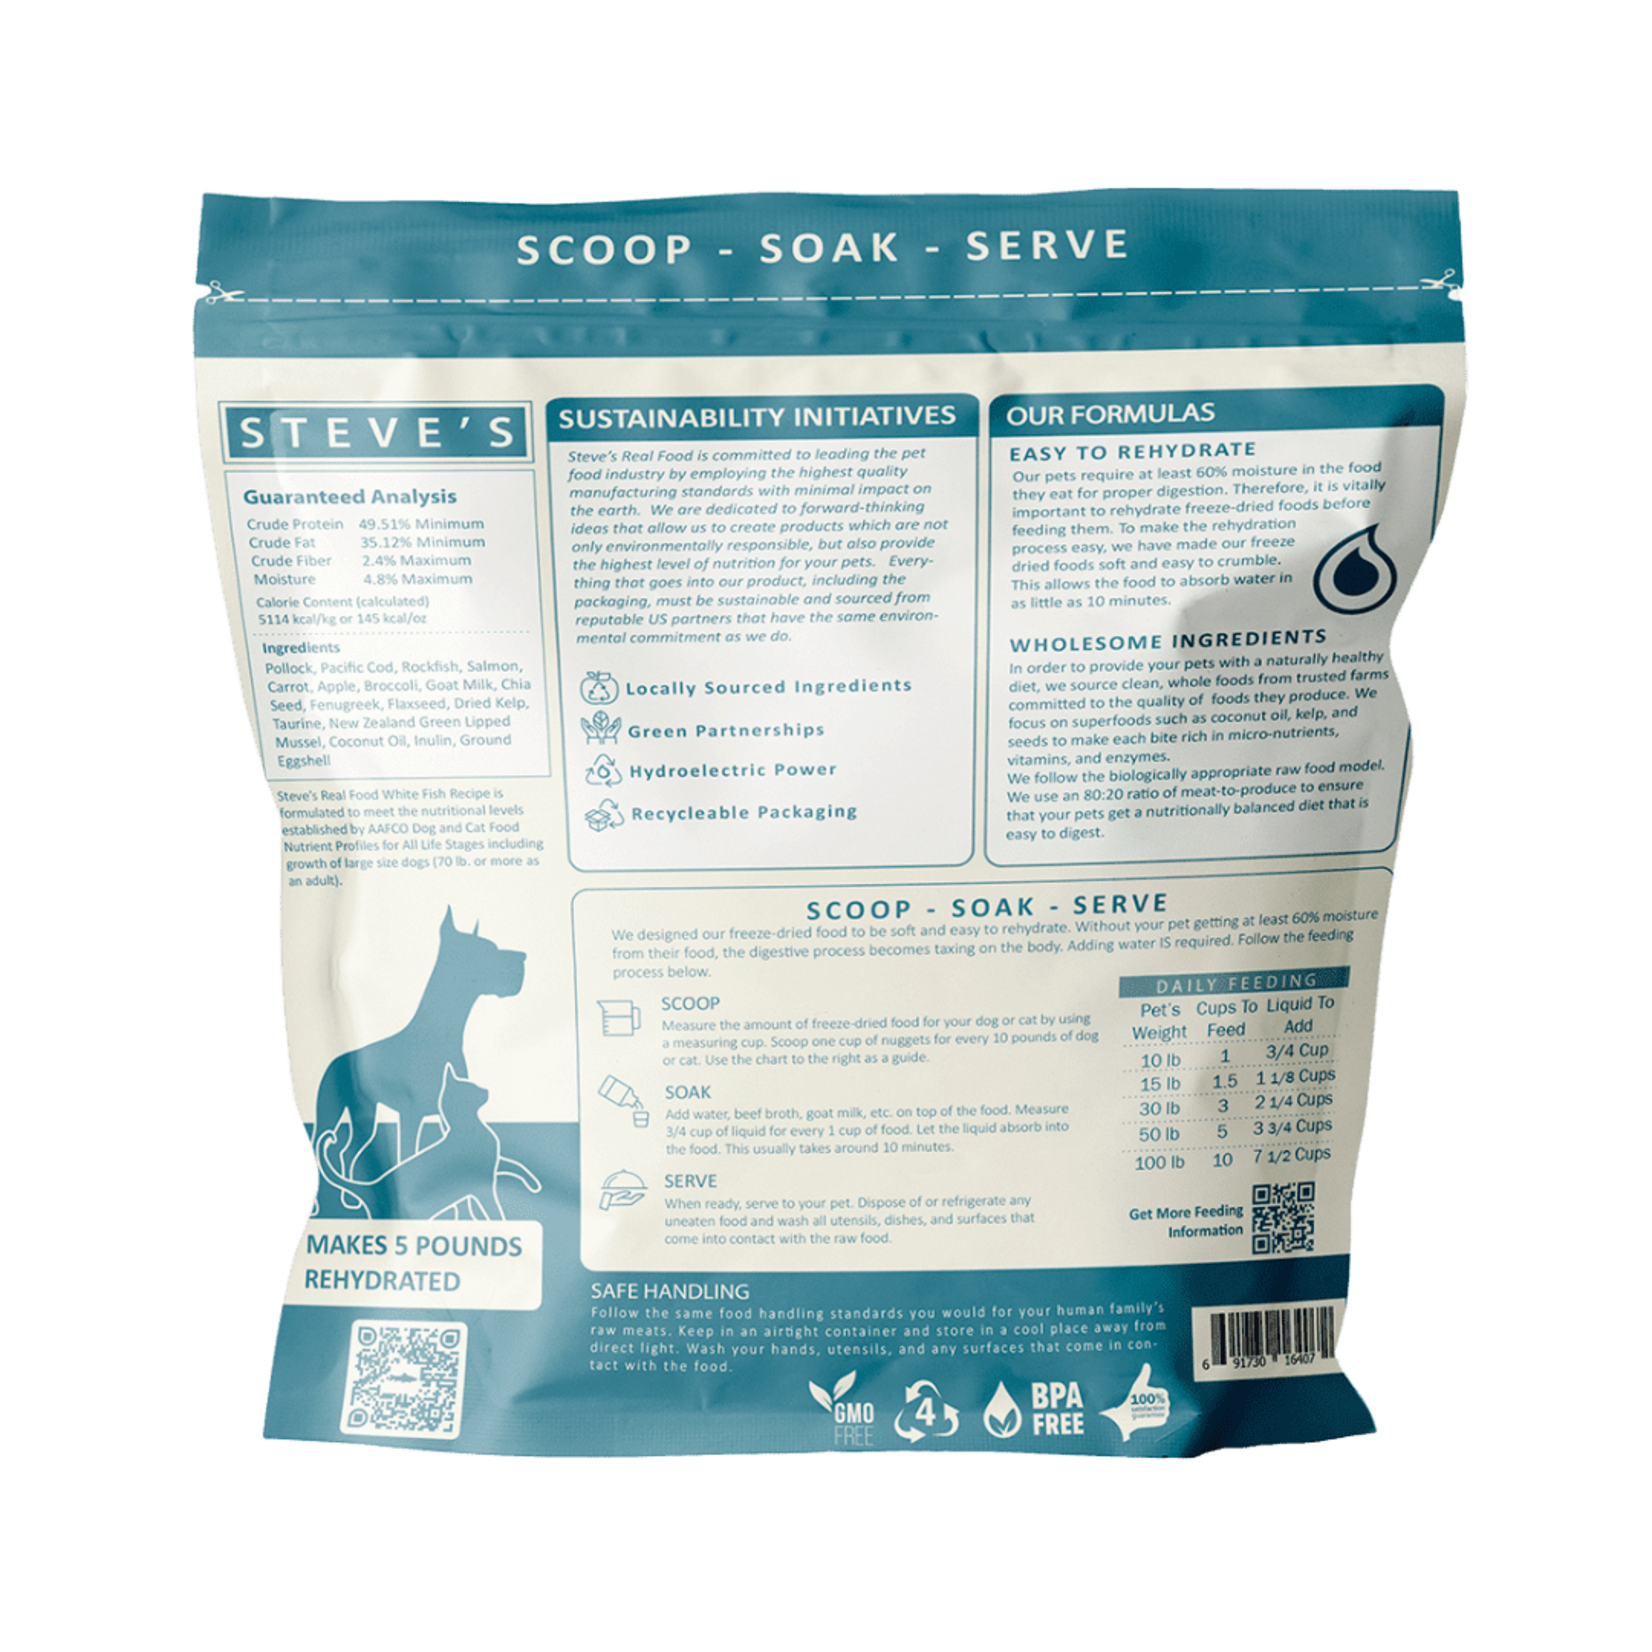 Steve's Real Food Steve's Real Food Raw Freeze Dried Whitefish Recipe for Cats & Dogs